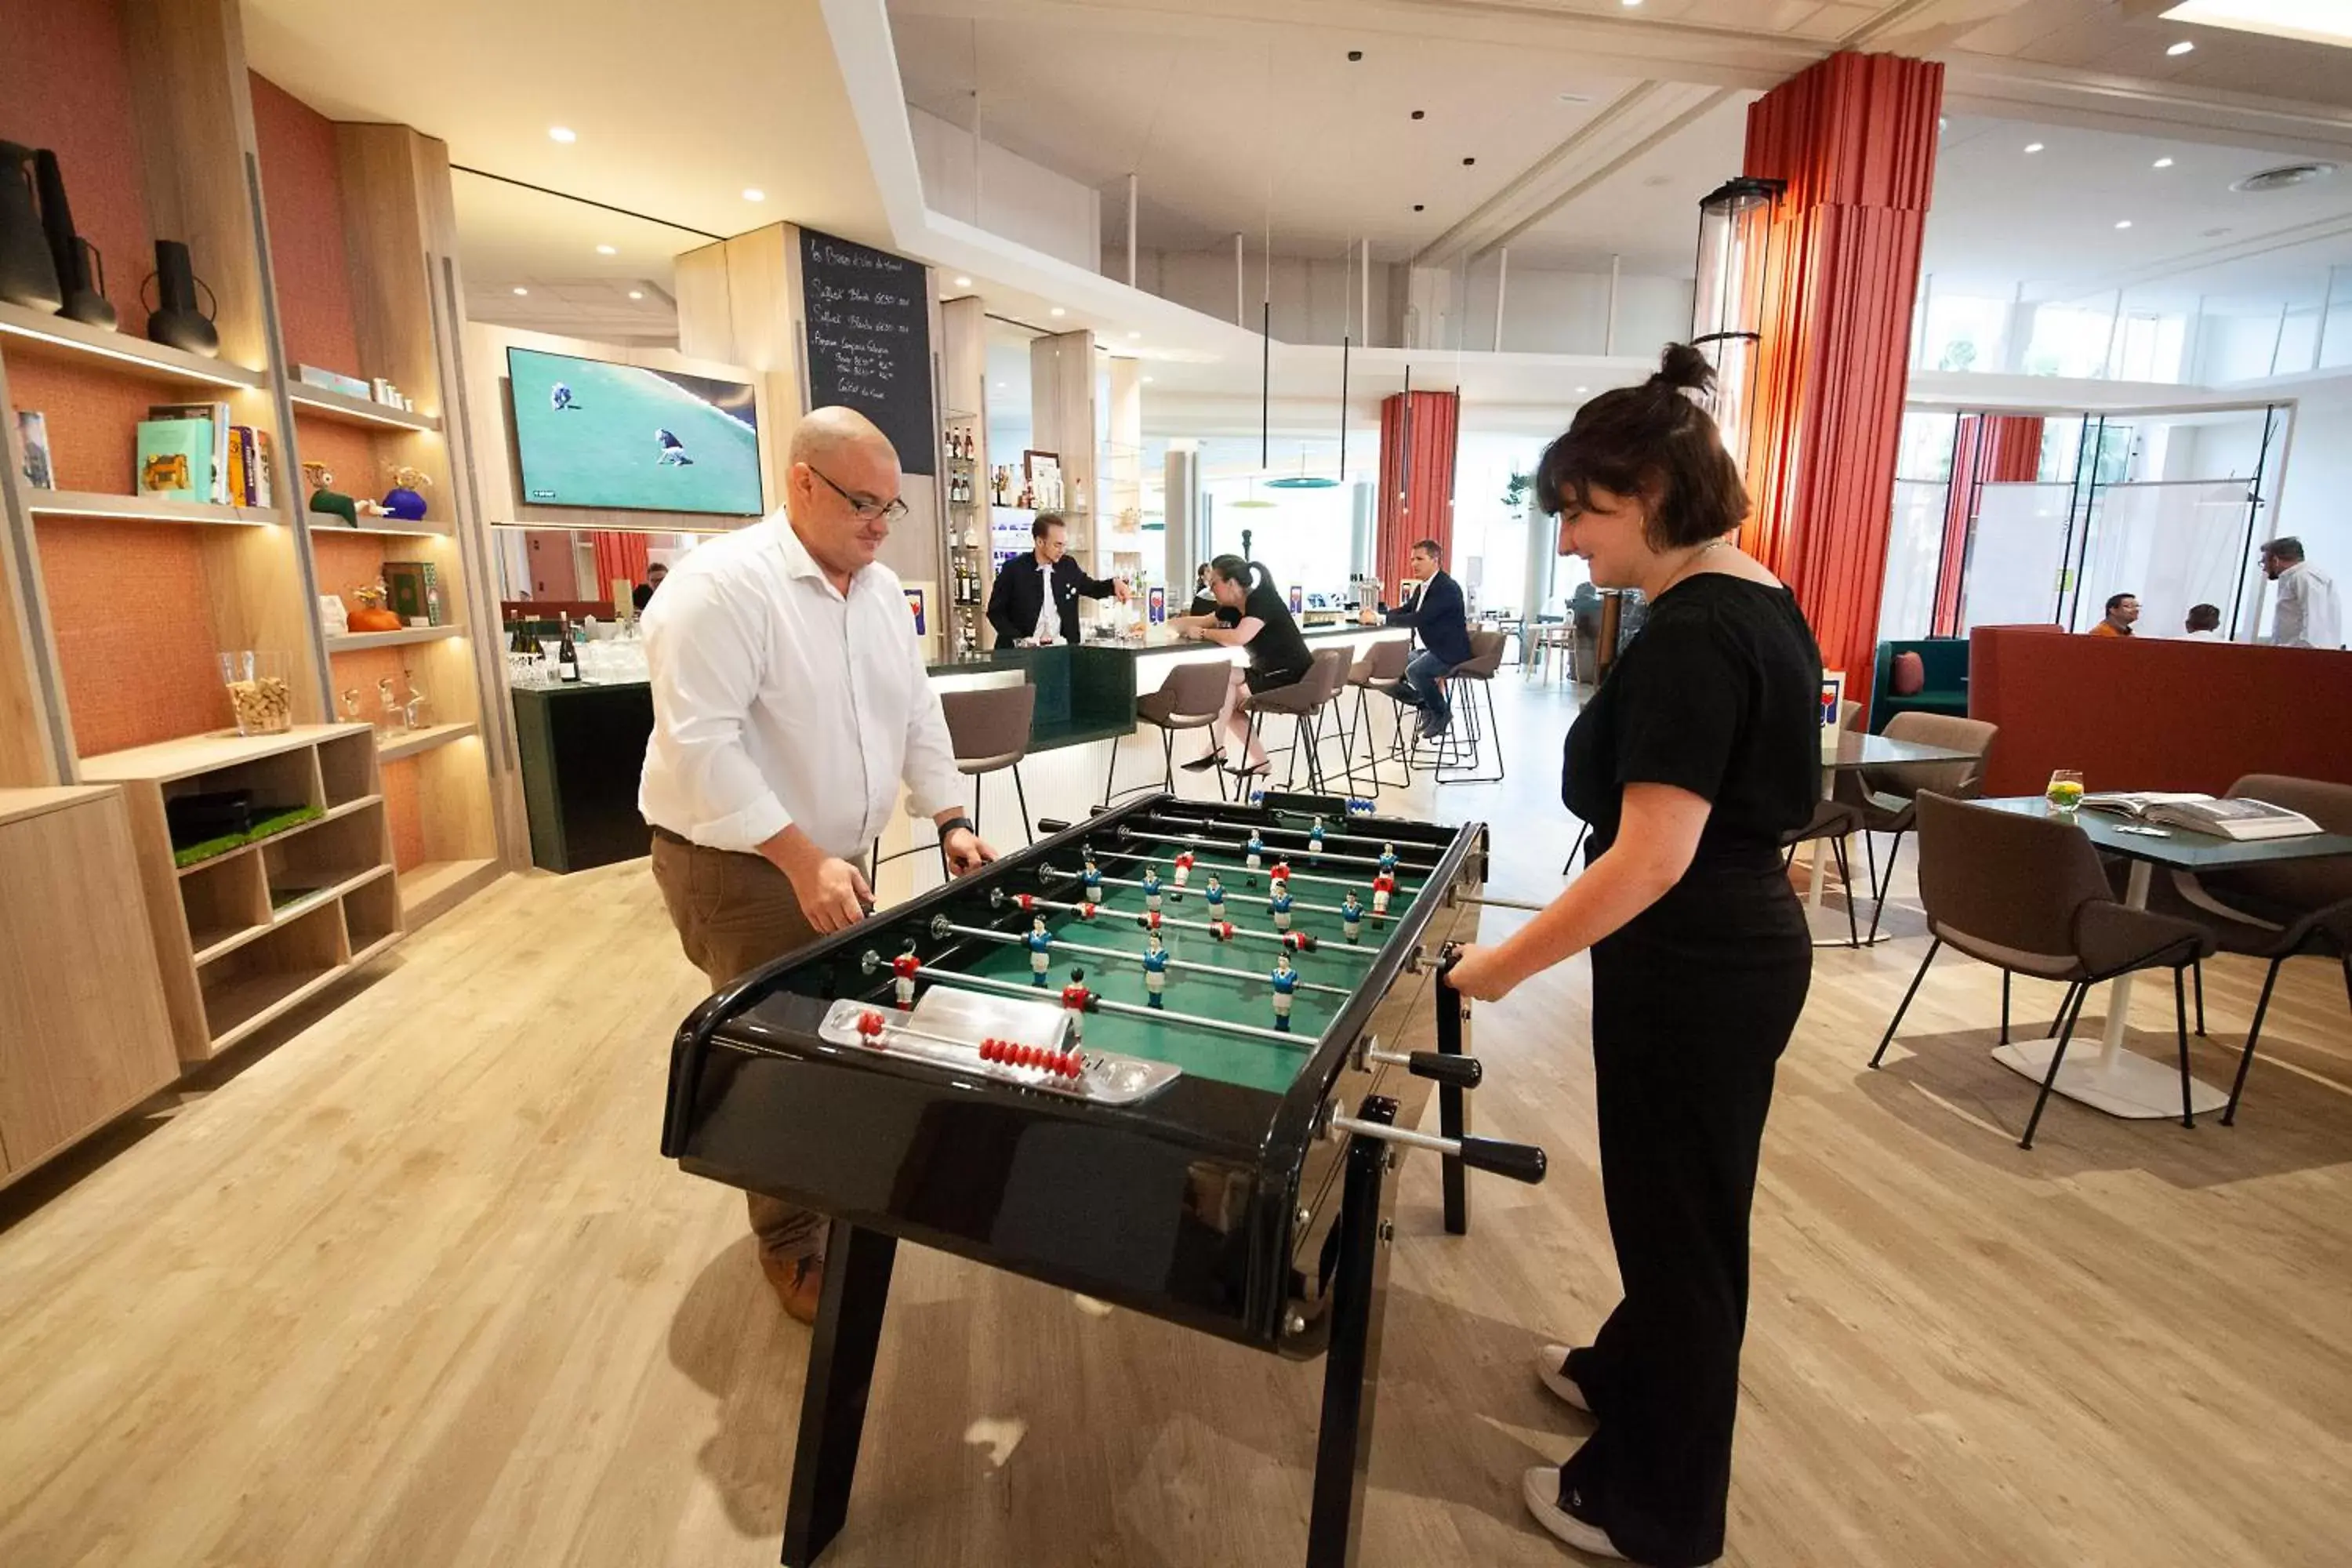 Game Room, Other Activities in Novotel Clermont-Ferrand